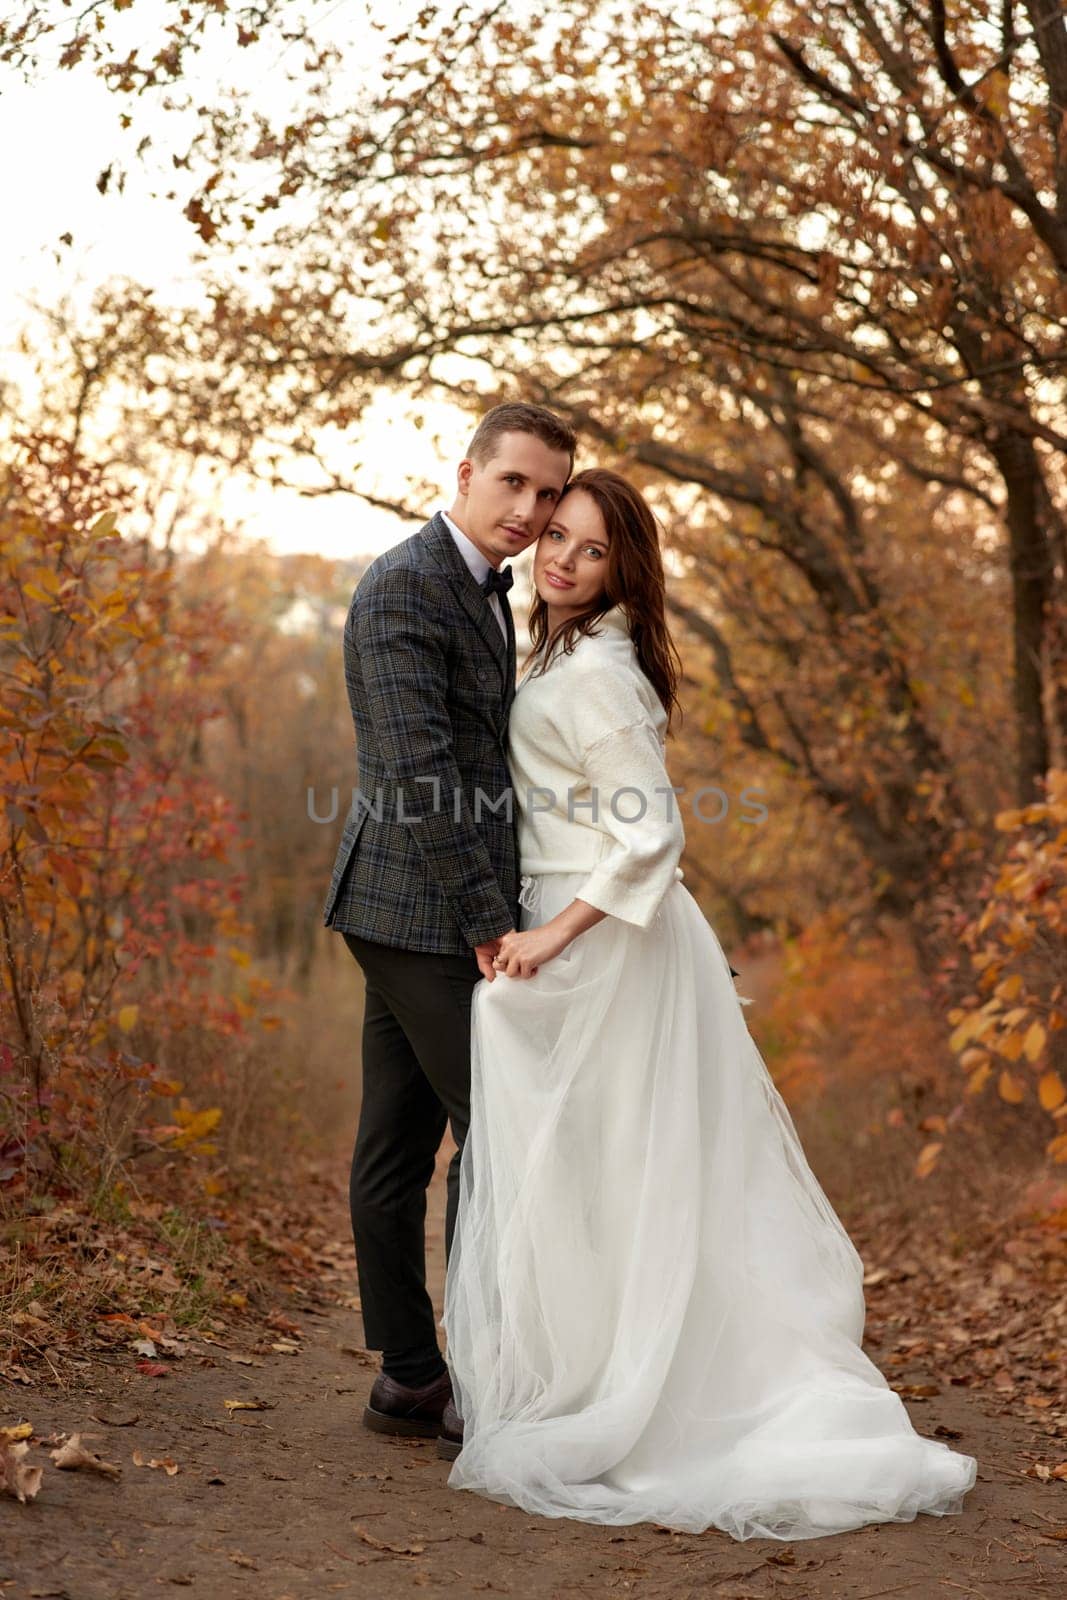 Newly married couple standing outdoor on natural background